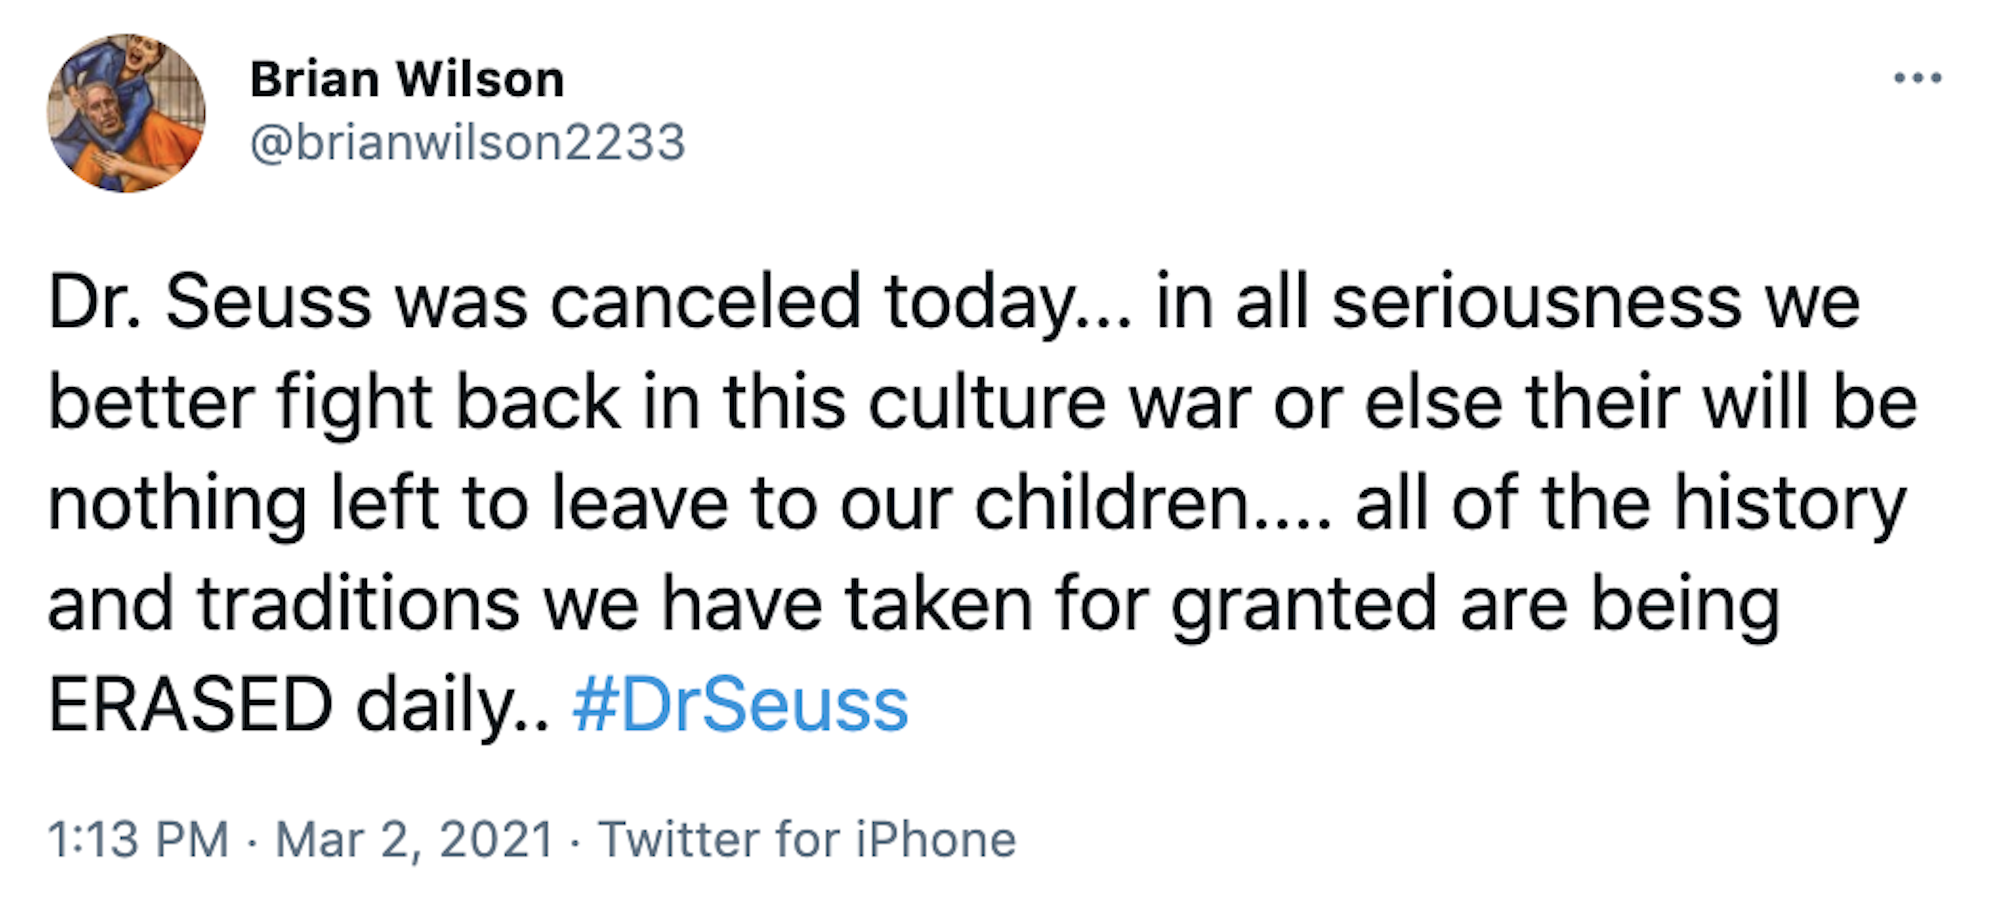 Dr. Seuss was canceled today... in all seriousness we better fight back in this culture war or else their will be nothing left to leave to our children.... all of the history and traditions we have taken for granted are being ERASED daily.. #DrSeuss